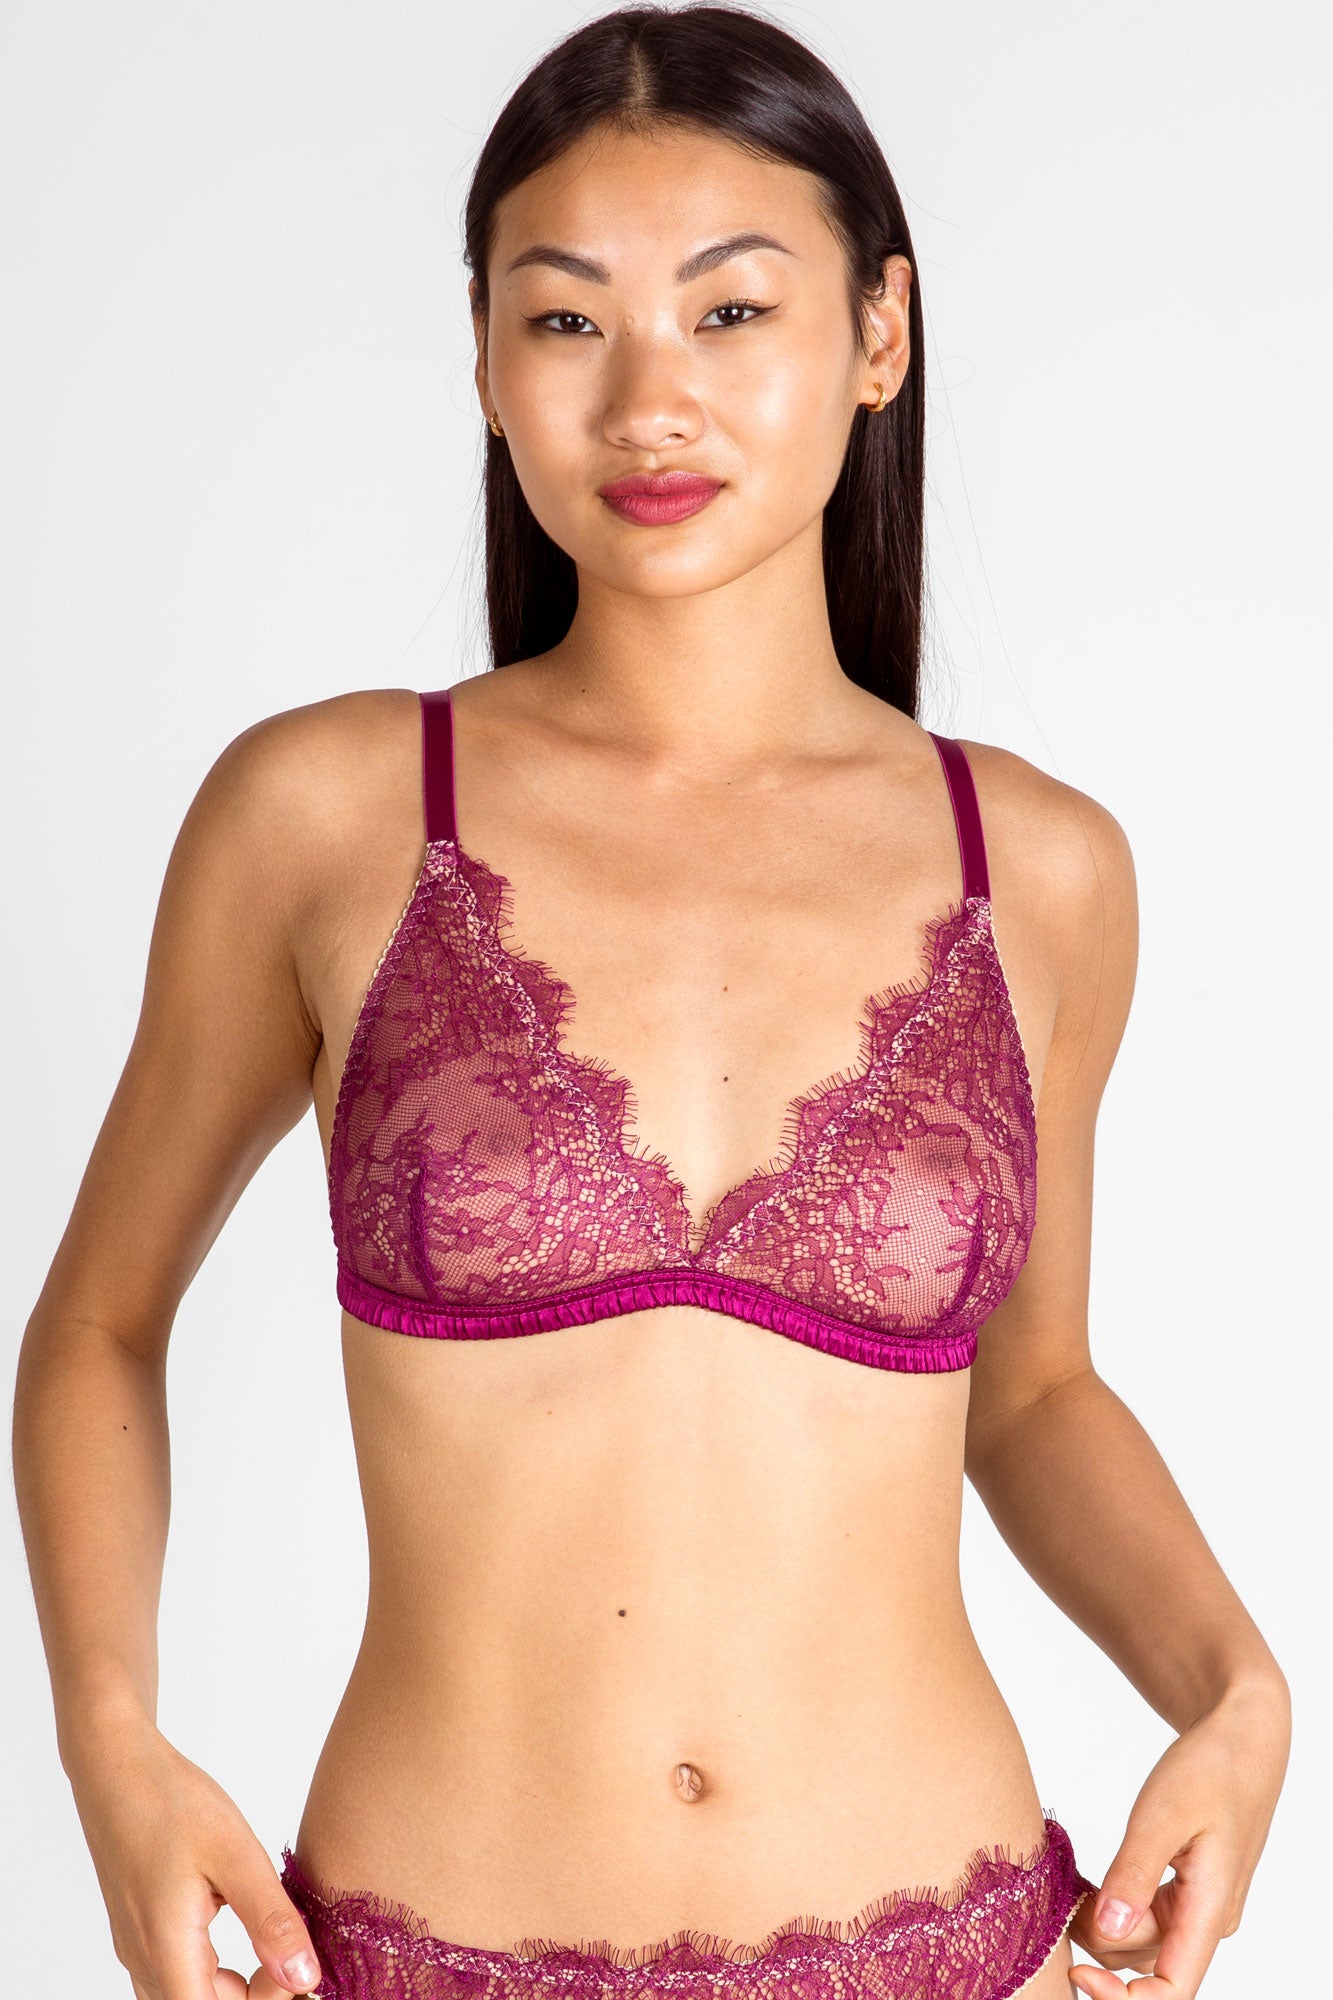 Urban Outfitters Camellia Lace Bralette in Natural